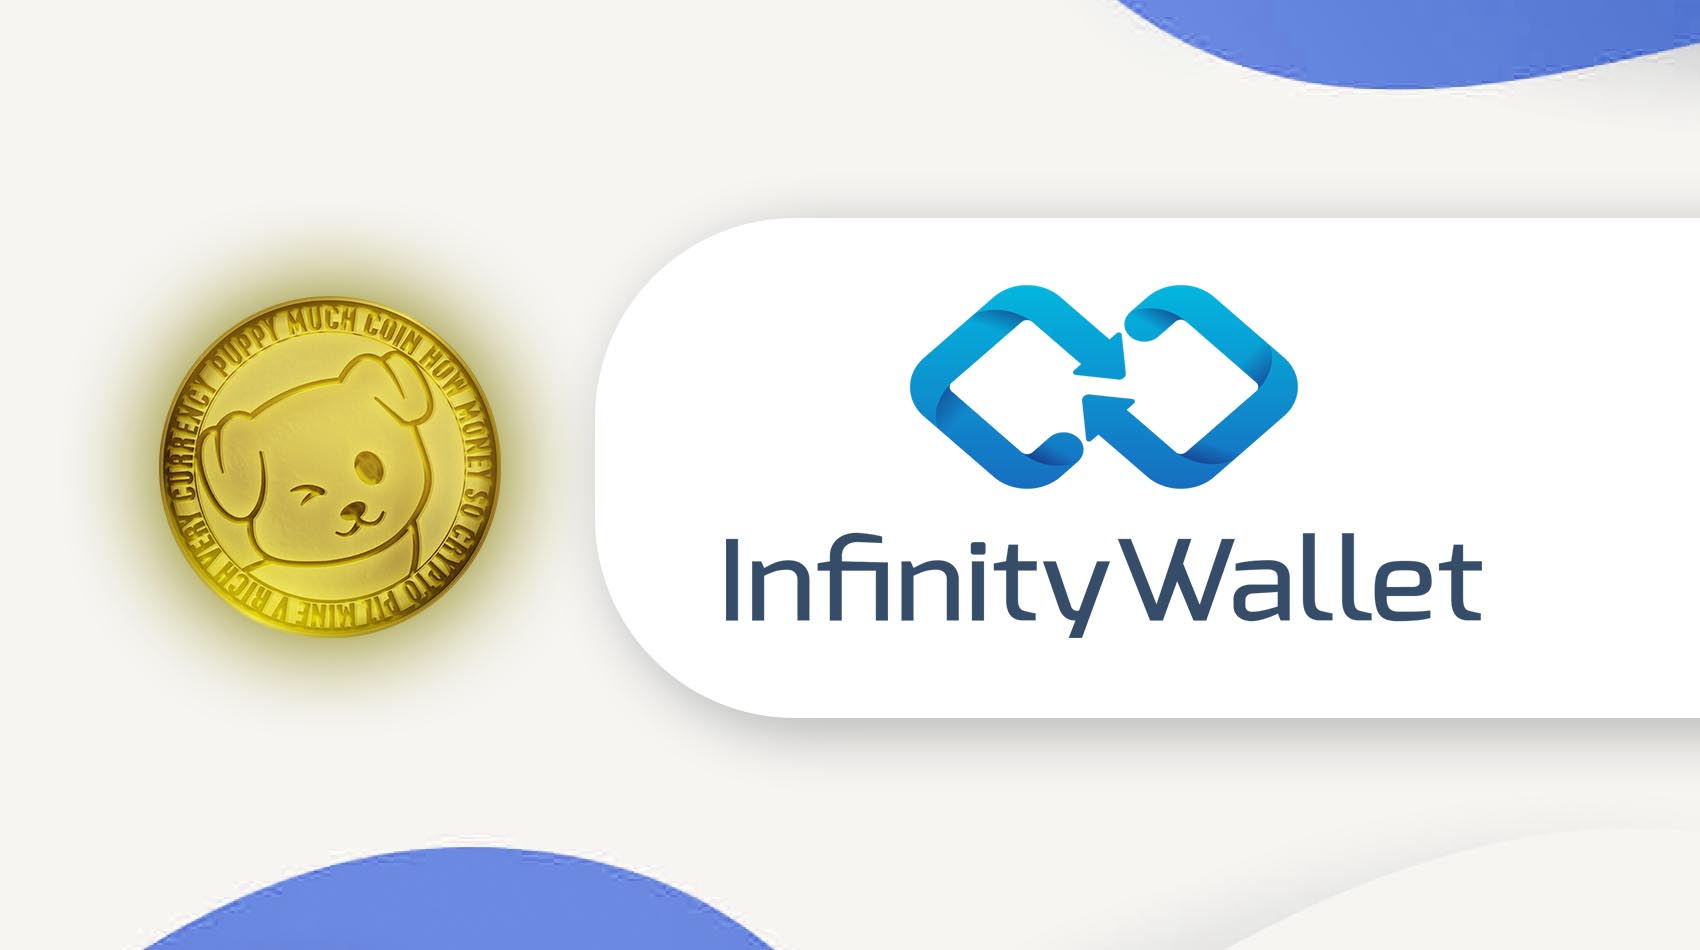 receive Puppy coin on Infinity Wallet